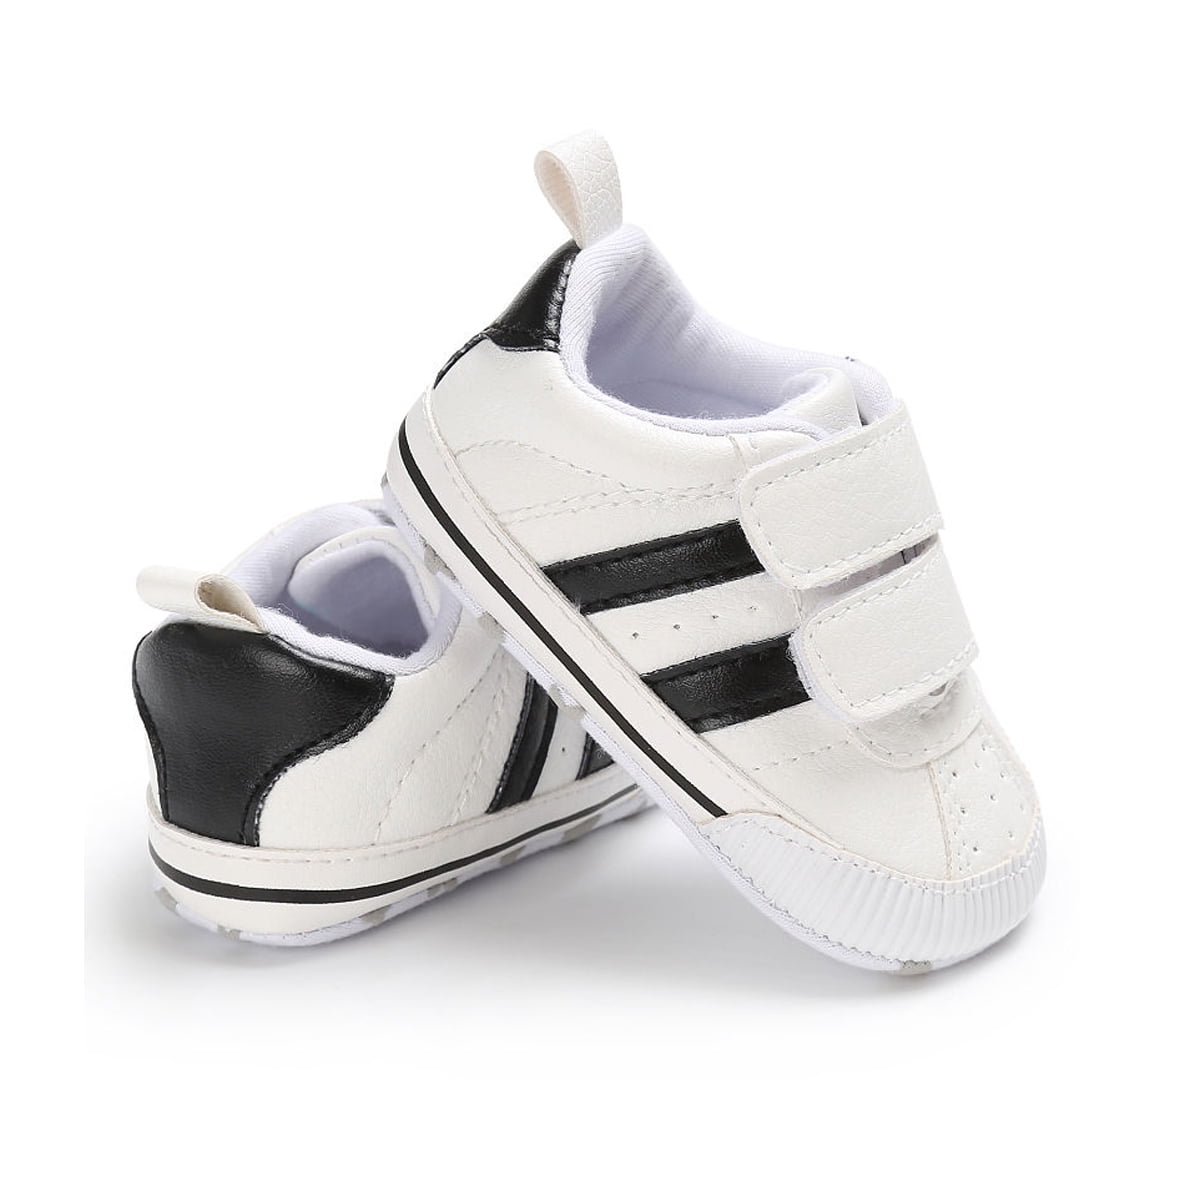 Infant Toddler Sport Sneakers Baby Boy 